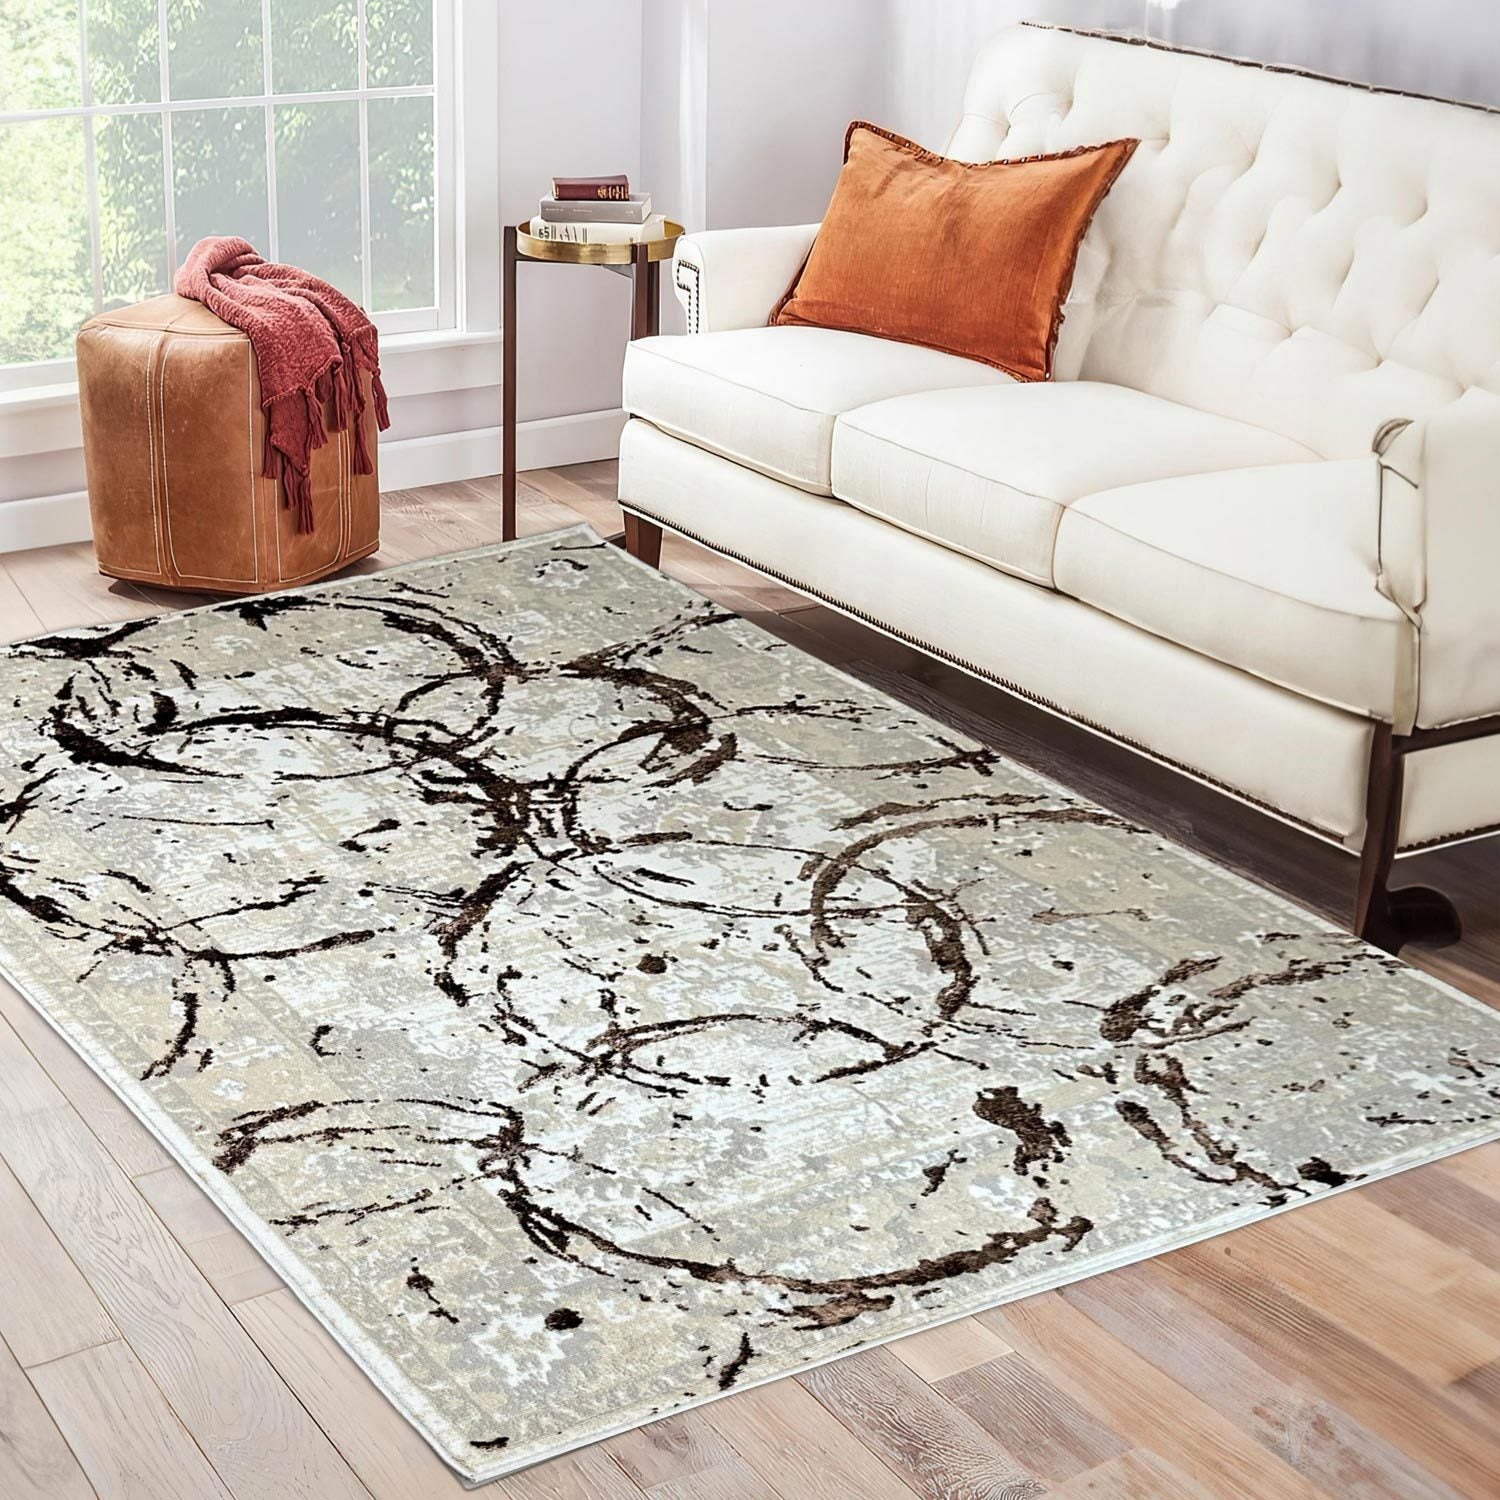 Penina Luxury Area Rug in Beige and Gray with Gold